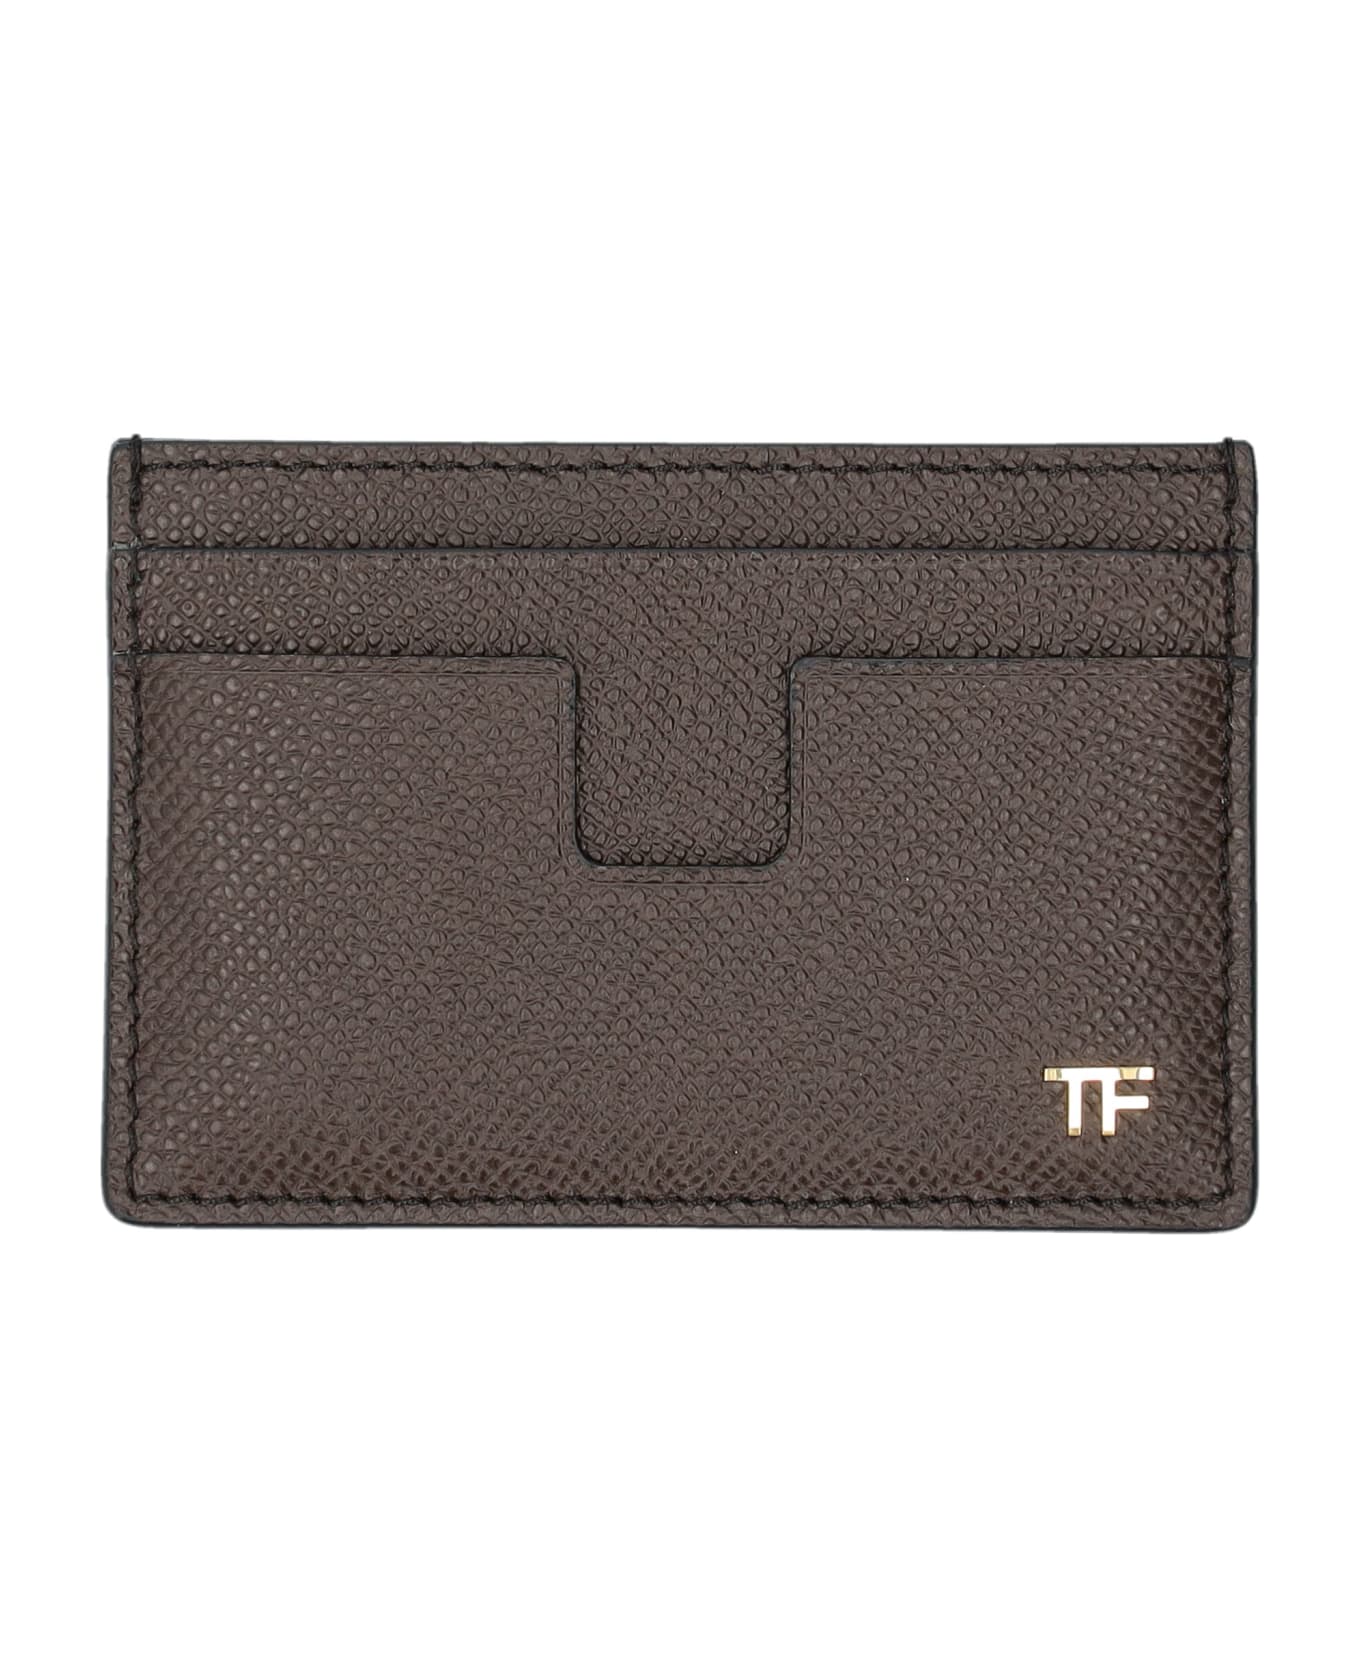 Tom Ford Small Grain Leather Cardholder - CHOCOLATE